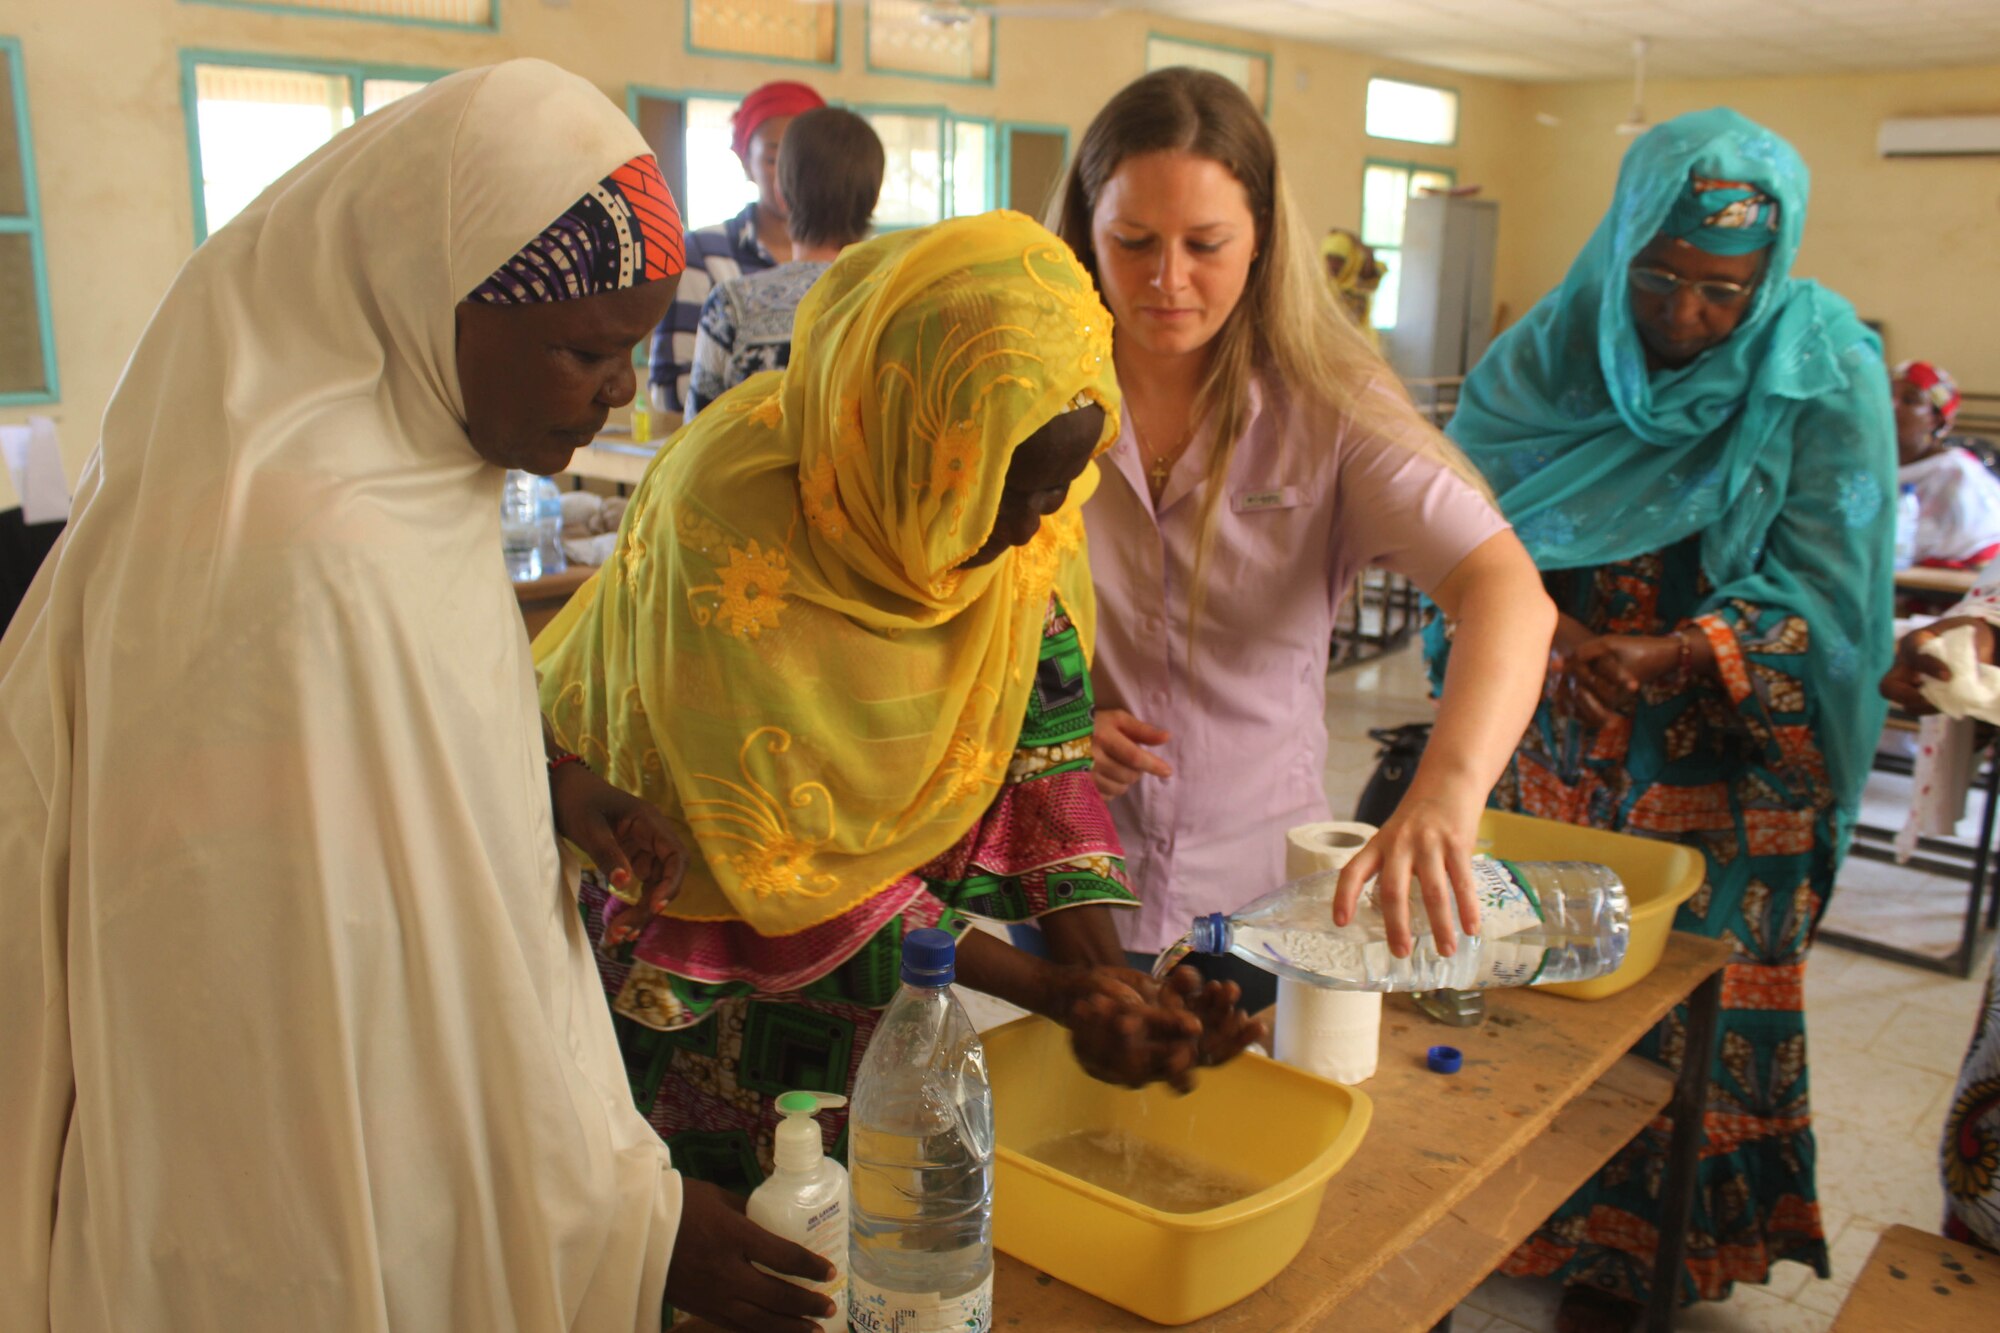 U.S. Air Force Tech. Sgt. Becky Smith (center right), 724th Expeditionary Air Base Squadron surgical technician, teaches basic hand washing methods during a women’s hygiene class for the Association of Nigerien Women Against War in Agadez, Niger, Aug. 14, 2017. Topics such as the importance of proper hygiene and how to combat communicable diseases were covered during the class. (Courtesy photo from the 724th Expeditionary Air Base Squadron medical section)